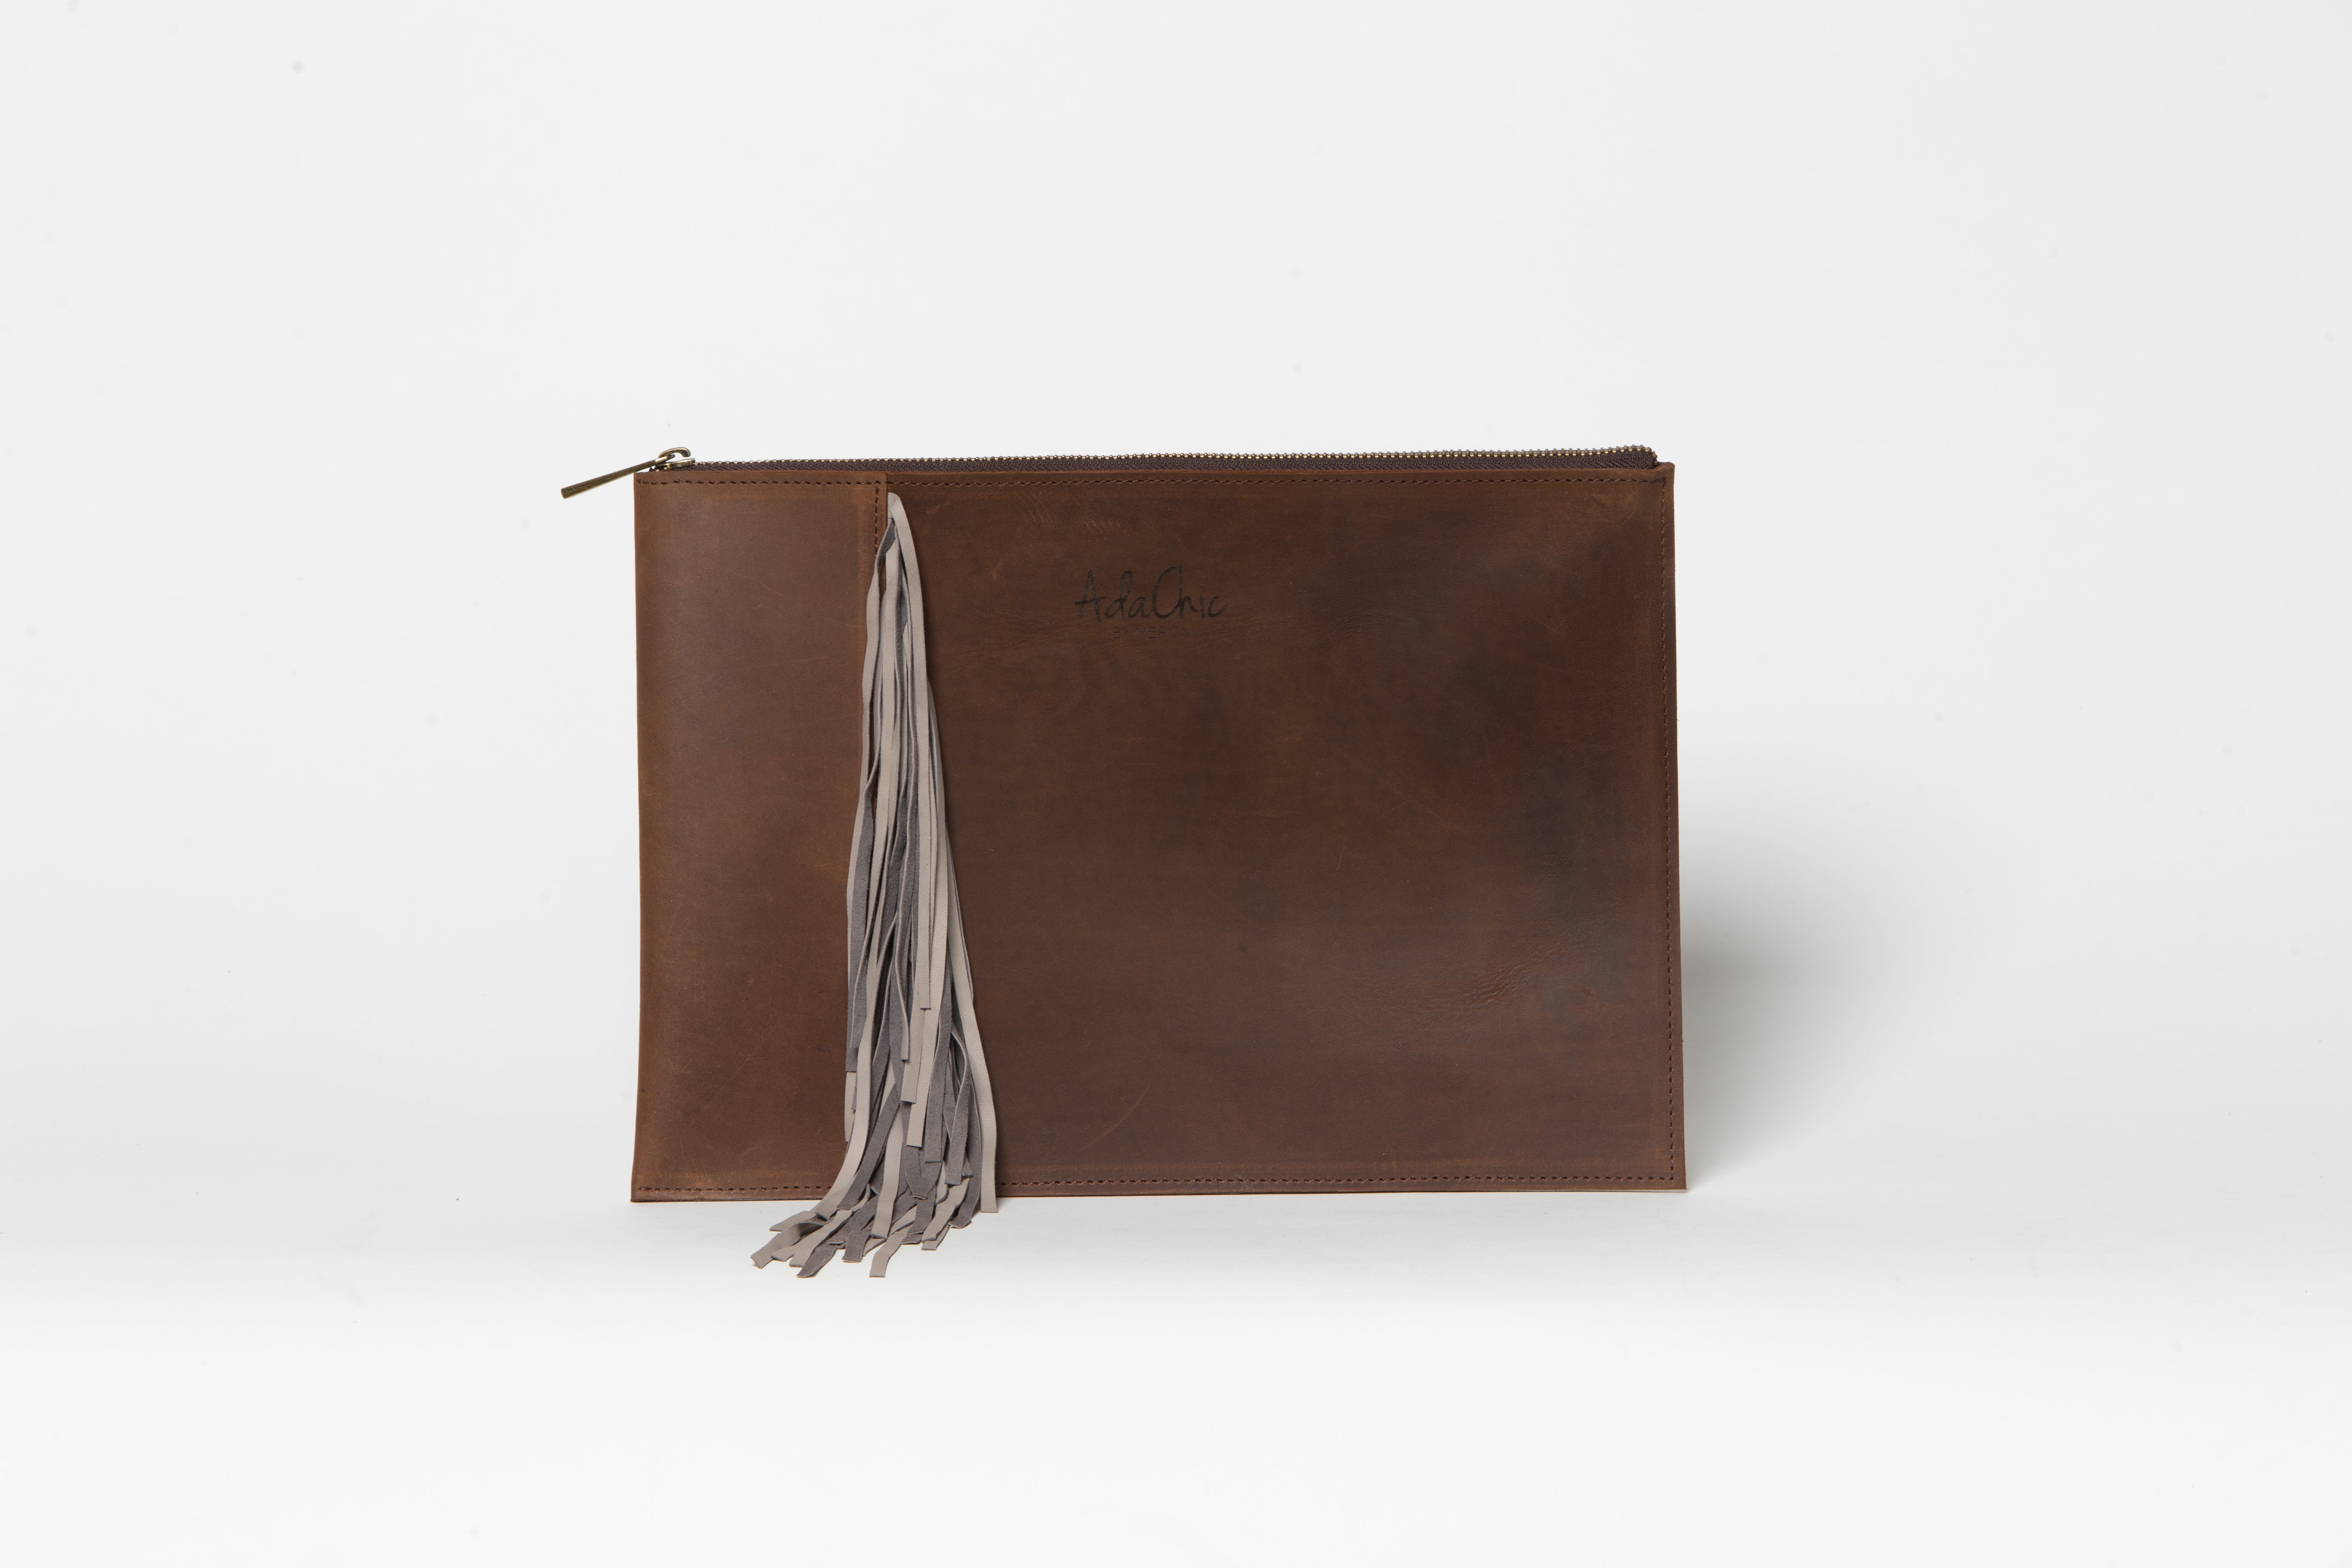 The Abina Envelope Clutch With Fringe